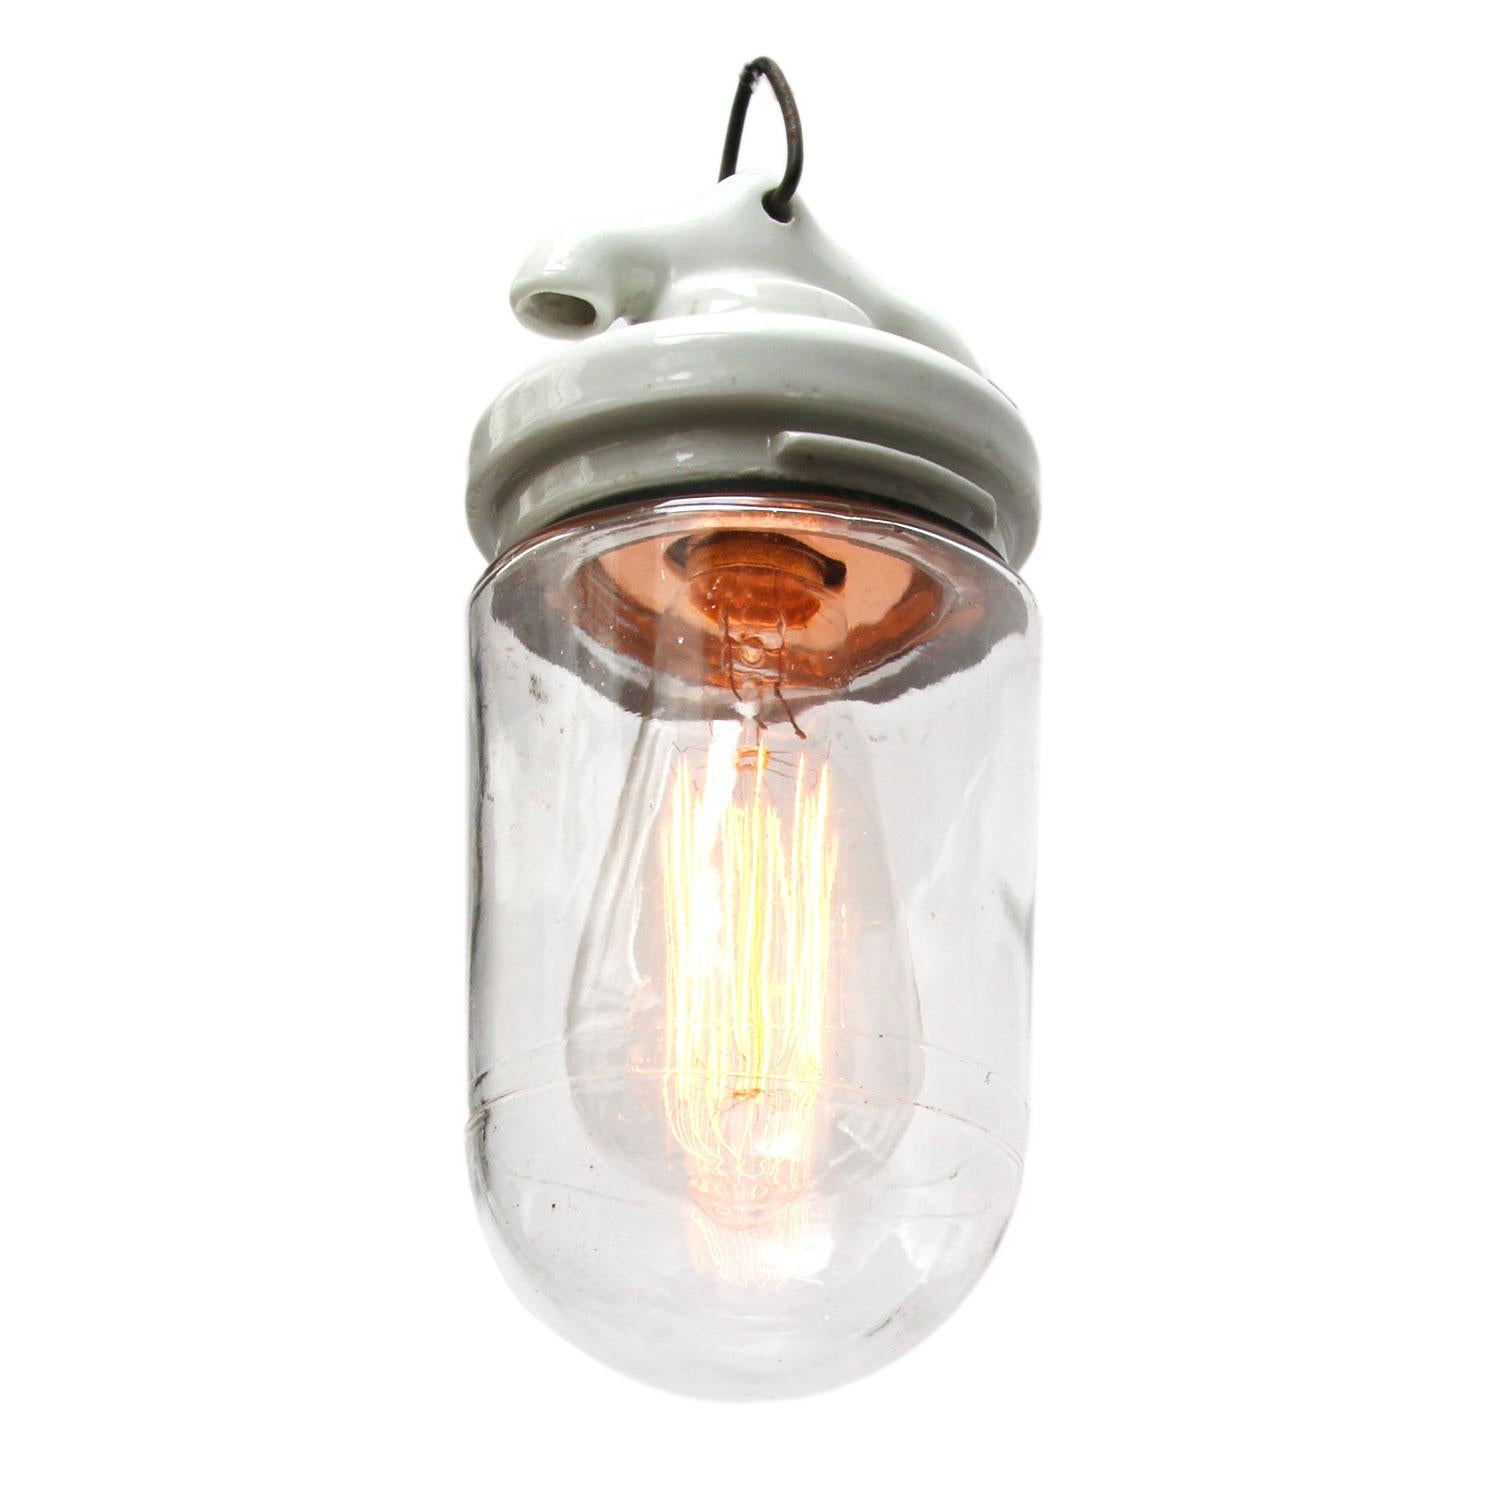 Porcelain hanging lamp.
White porcelain with clear glass.
2 conductors, no ground.

Weight: 1.00 kg / 2.2 lb

Priced per individual item. All lamps have been made suitable by international standards for incandescent light bulbs,